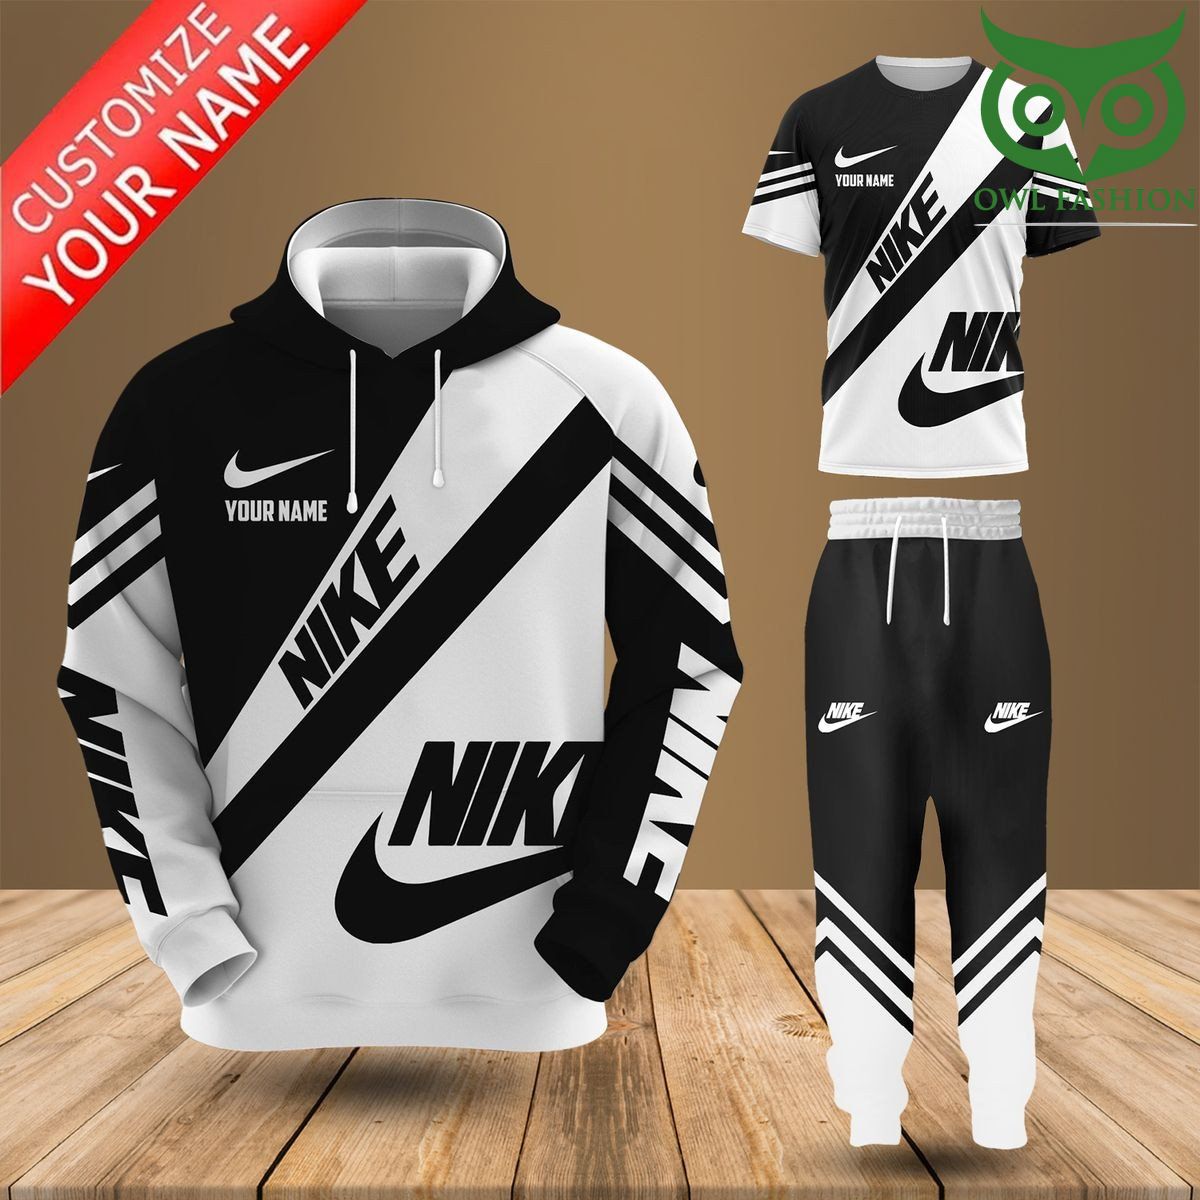 22 Personalized Nike black and white hoodies T Shirt and sweatpants